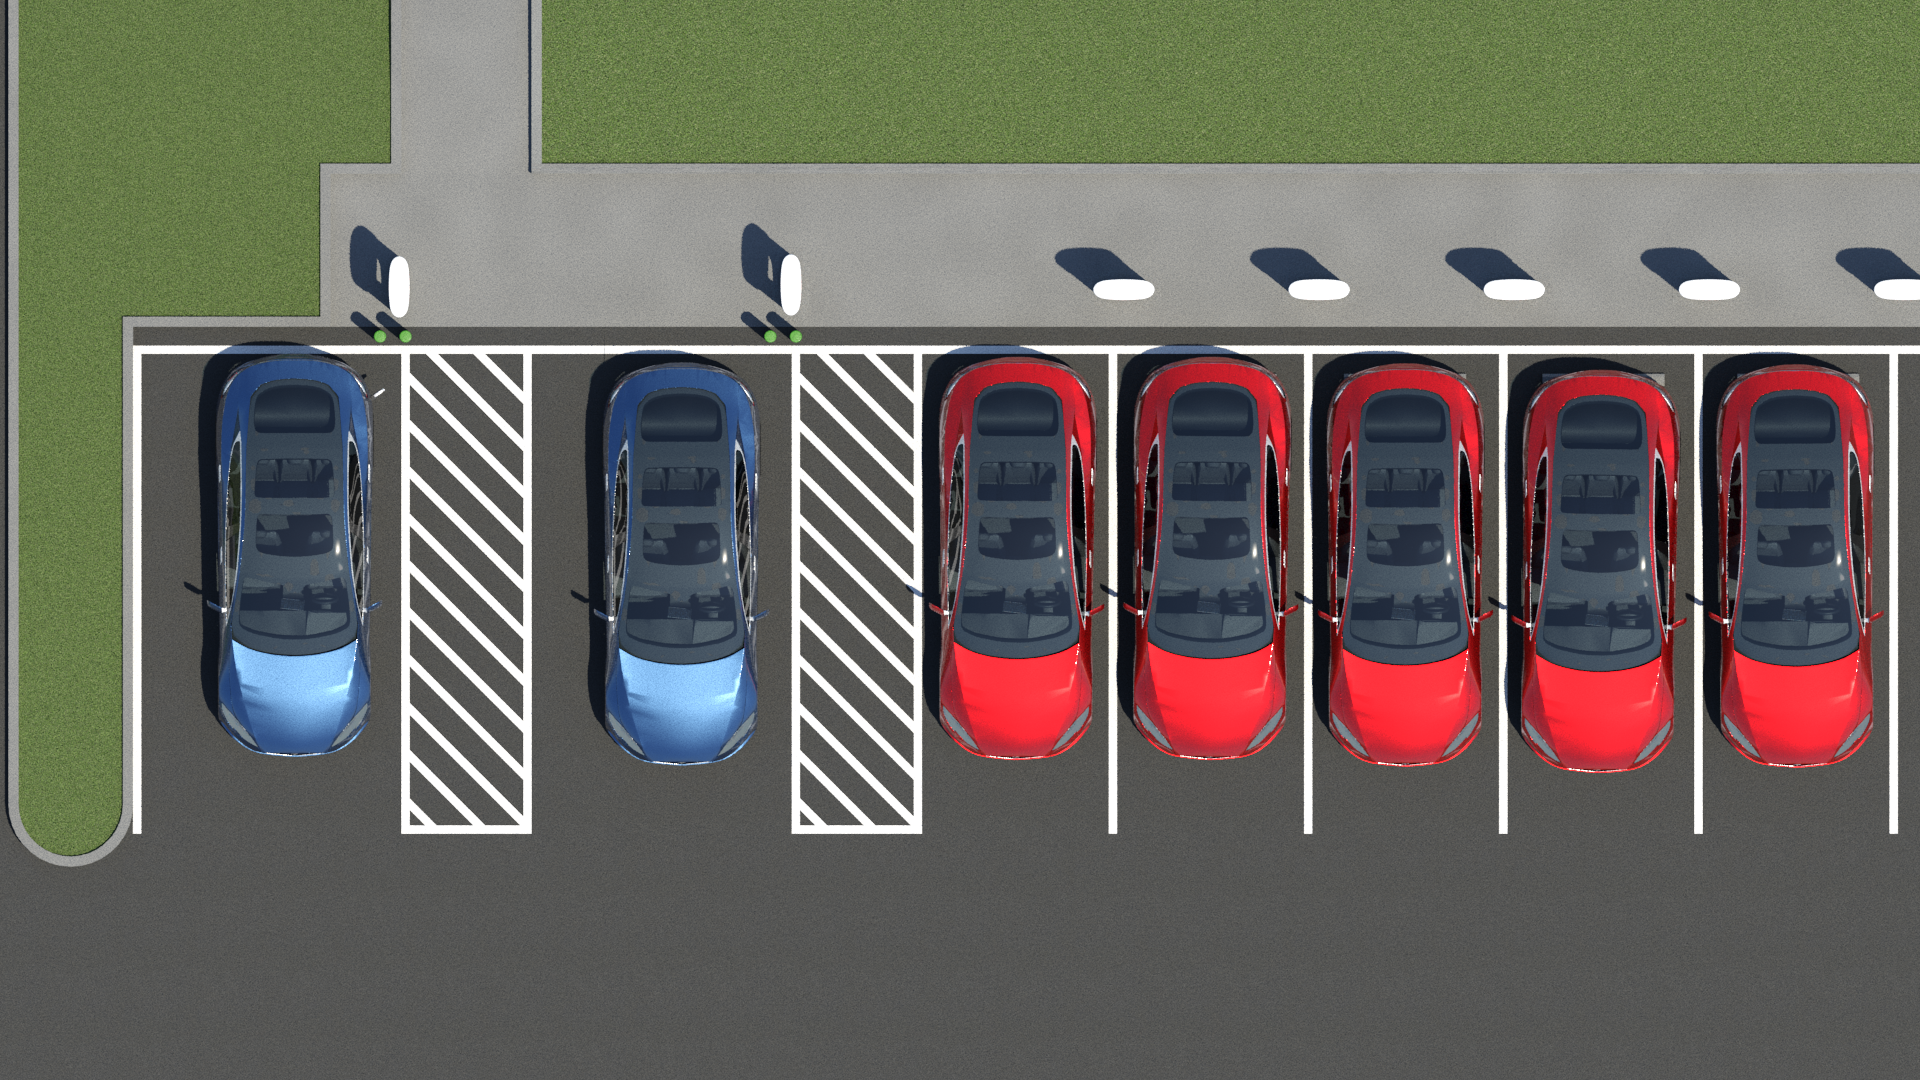 Fast EV charging station with multiple vehicles backed into the vehicle charging spaces. Accessible vehicle charging space with access aisle on the right side. Blue vehicle backed into the vehicle charging space so driver side door aligns with access aisle. Yellow route indicates path from driver's door to EV charger. EV charger is rotated so clear floor space yellow rectangle is in the same direction as the access aisle. 2nd vehicle charging space also has access aisle on the right side. Access aisles are not shared and do not overlap. 3 red vehicles at inaccessible charging spaces.